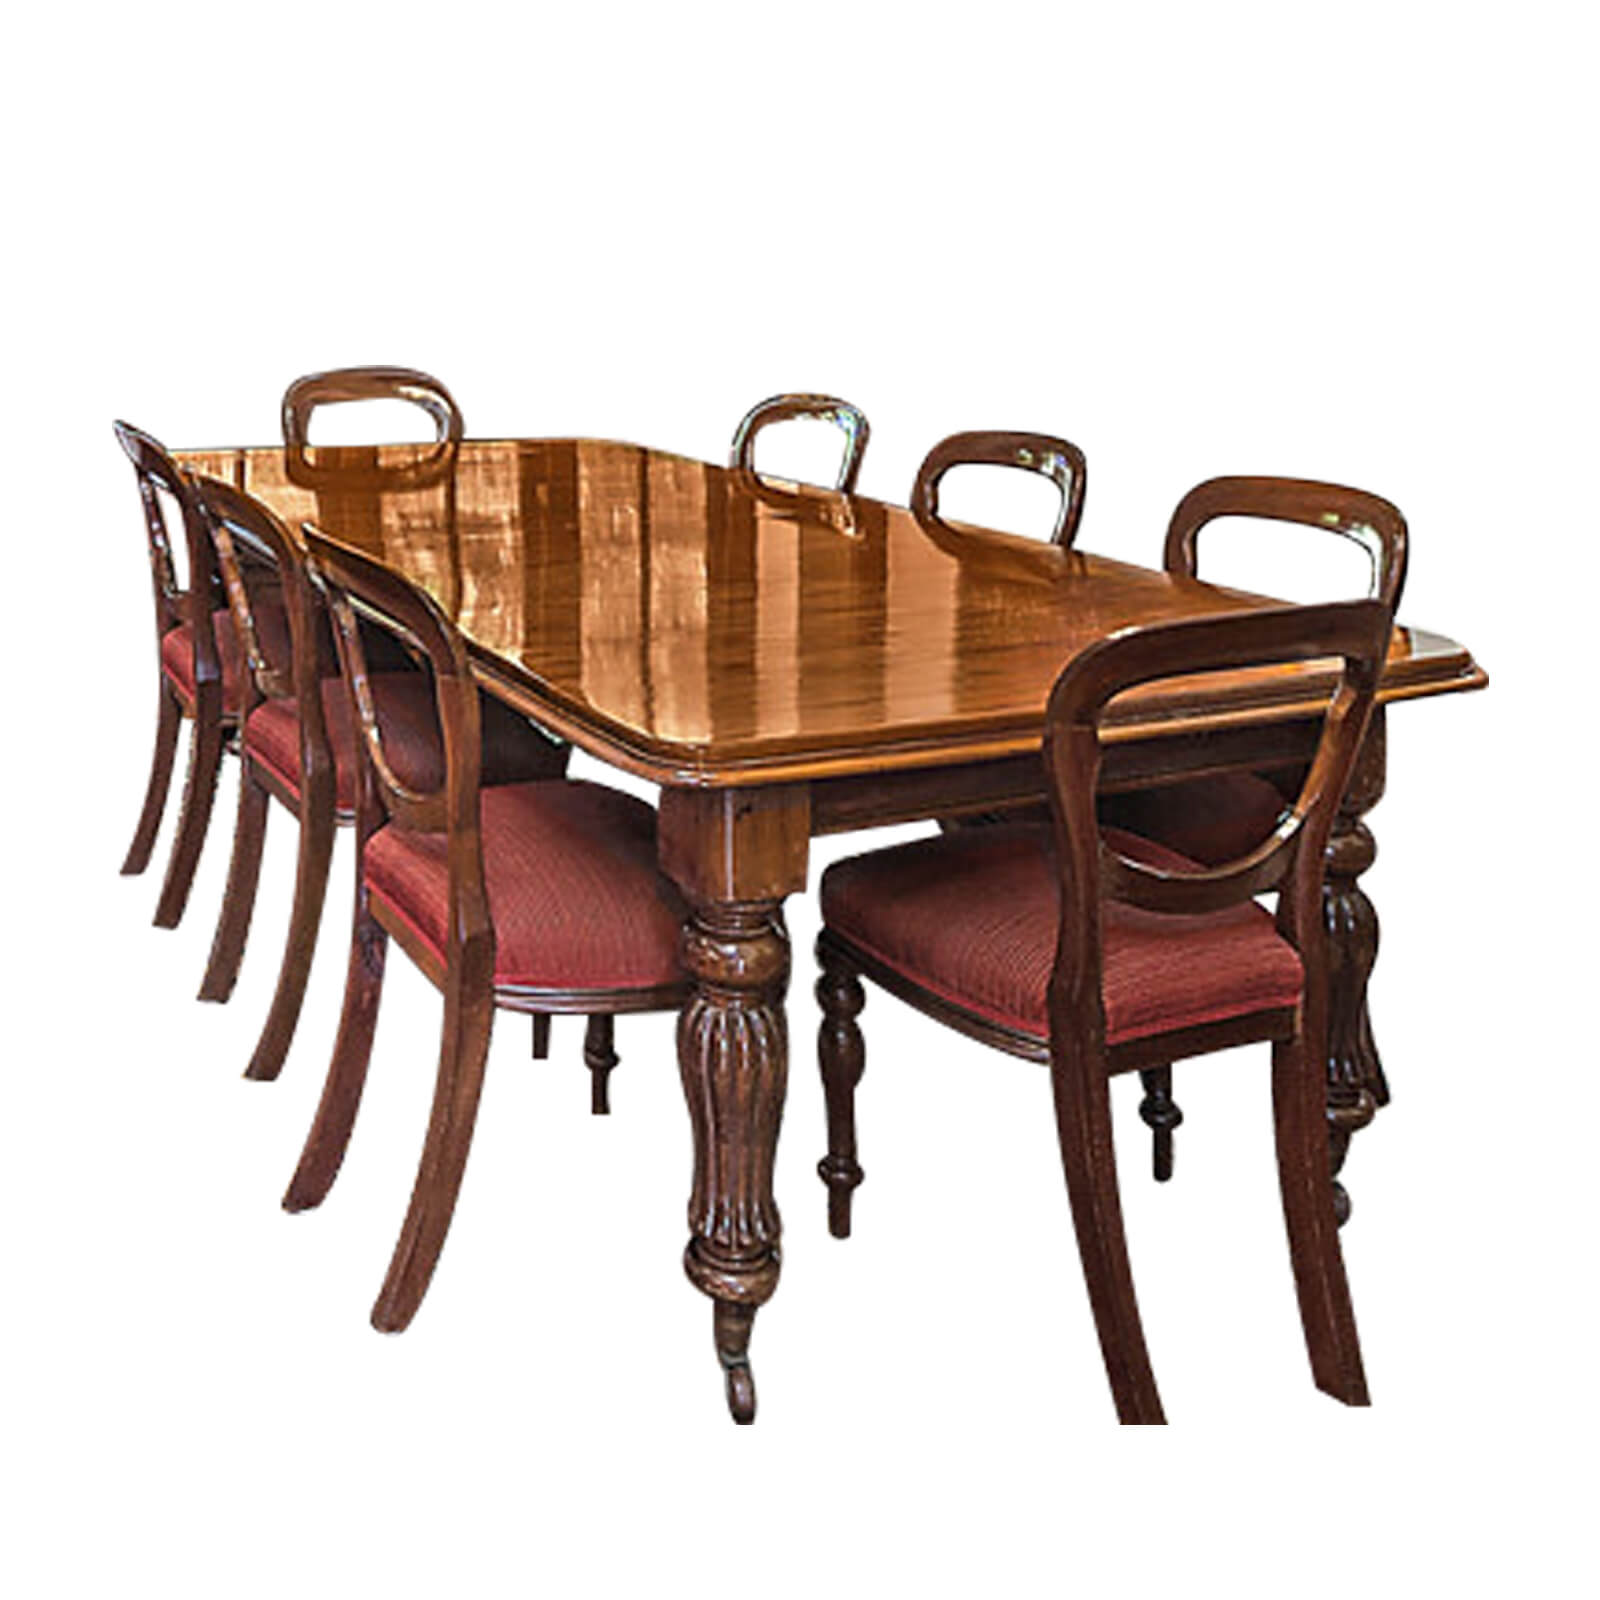 Mahogany Dining Table Chairs Two, Mahogany Dining Room Table And 8 Chairs